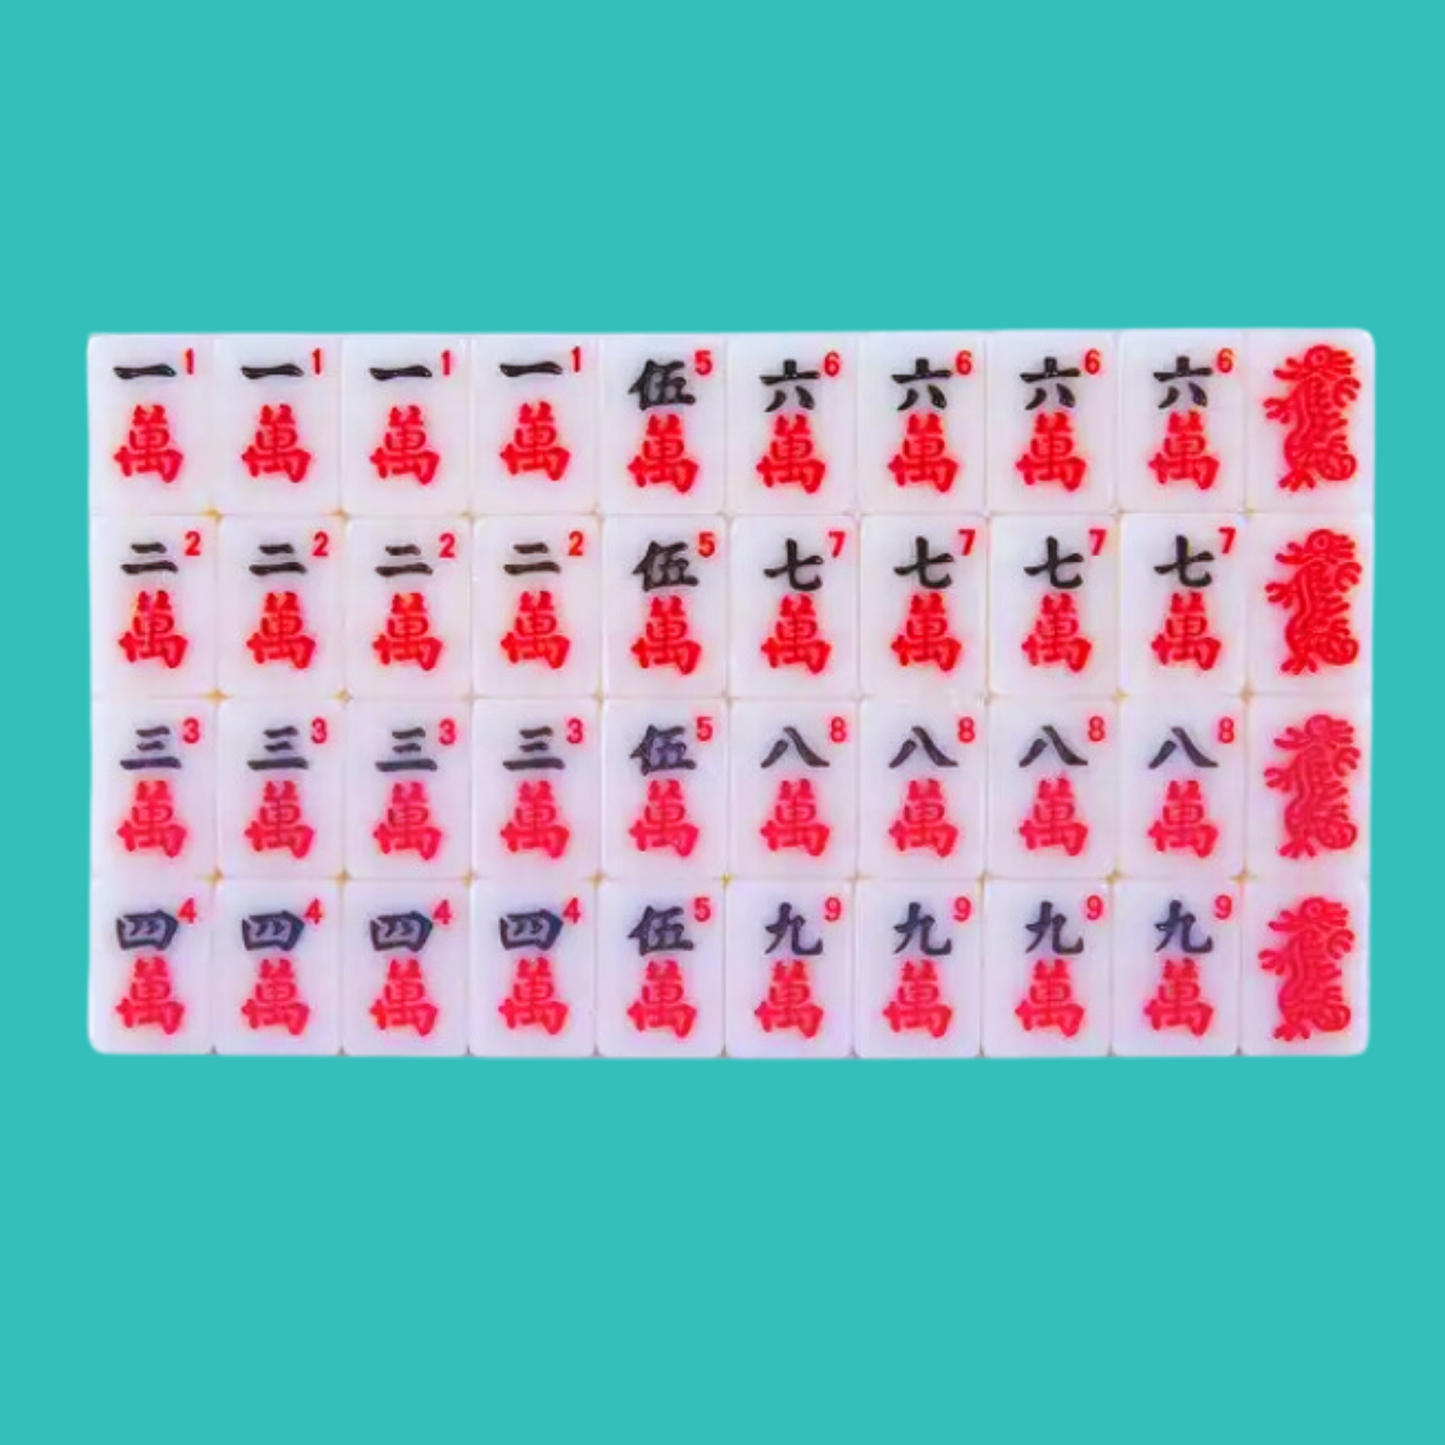 Mahjong Traditional Mini American Series Travel American Mahjongg Tile Set of 166 melamine white tiles, bright pink and teal bag, custom instruction and tips card, 2 colorful dice- crack crak red dragon tiles